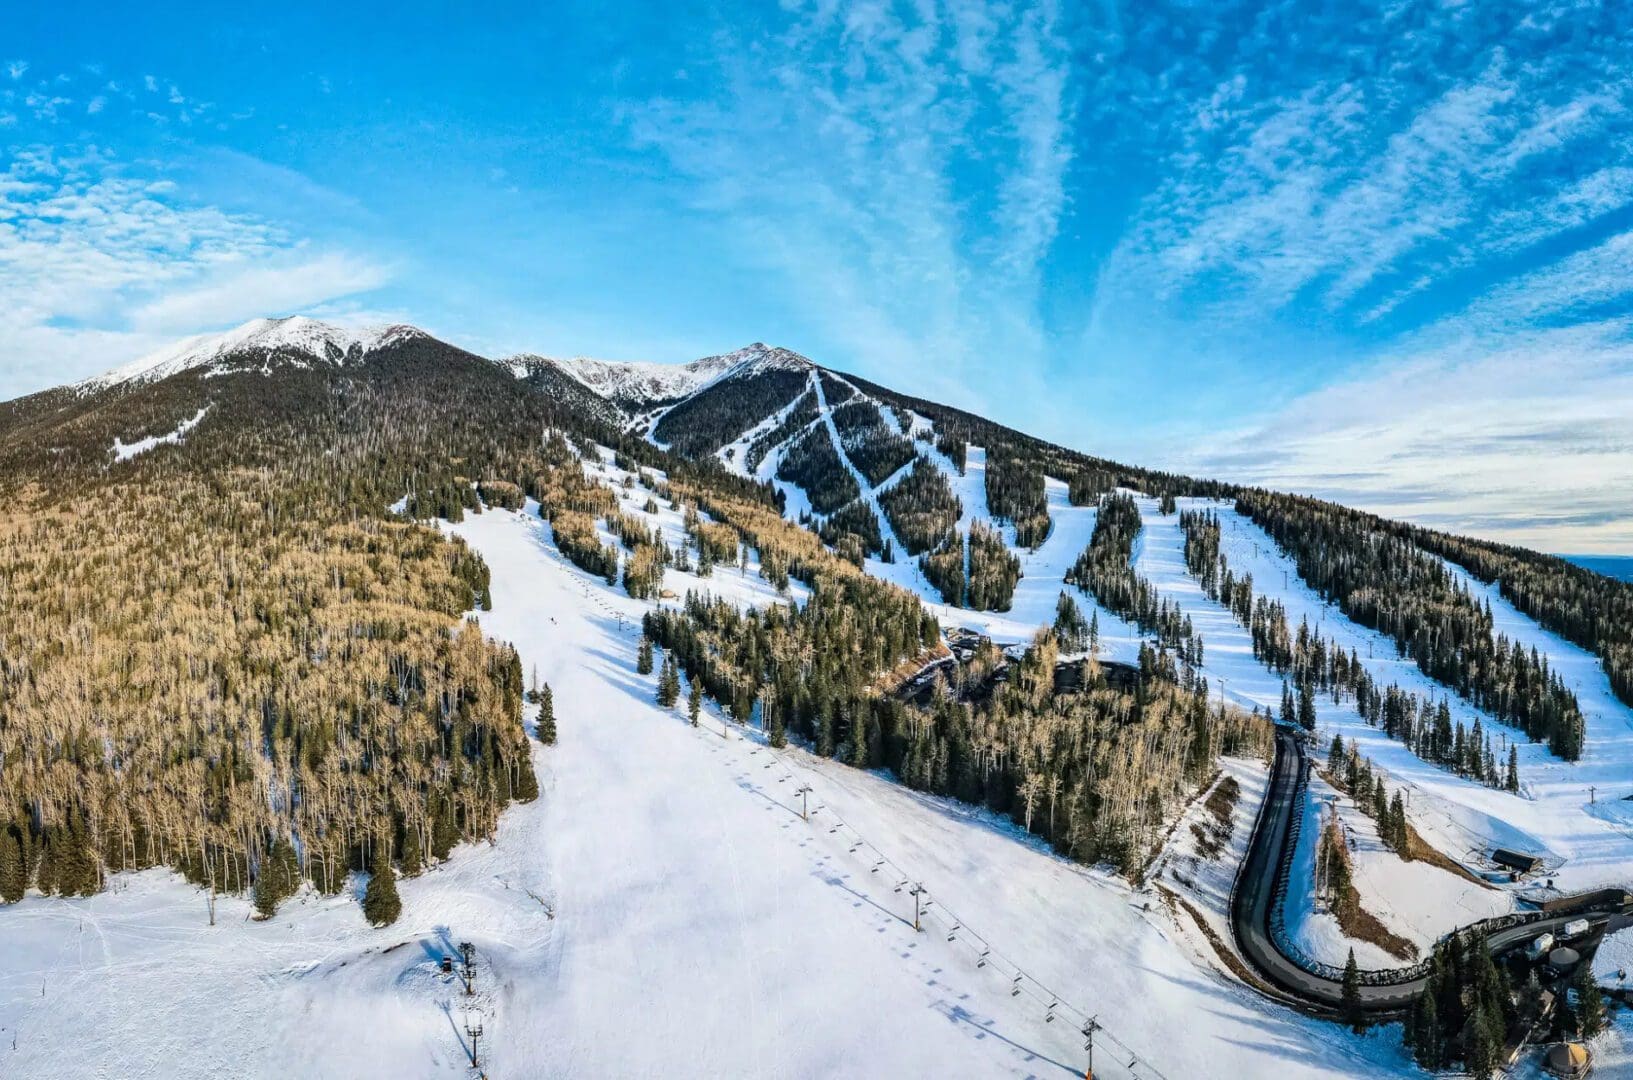 snow covered mountain with ski trails, lifts, and trees